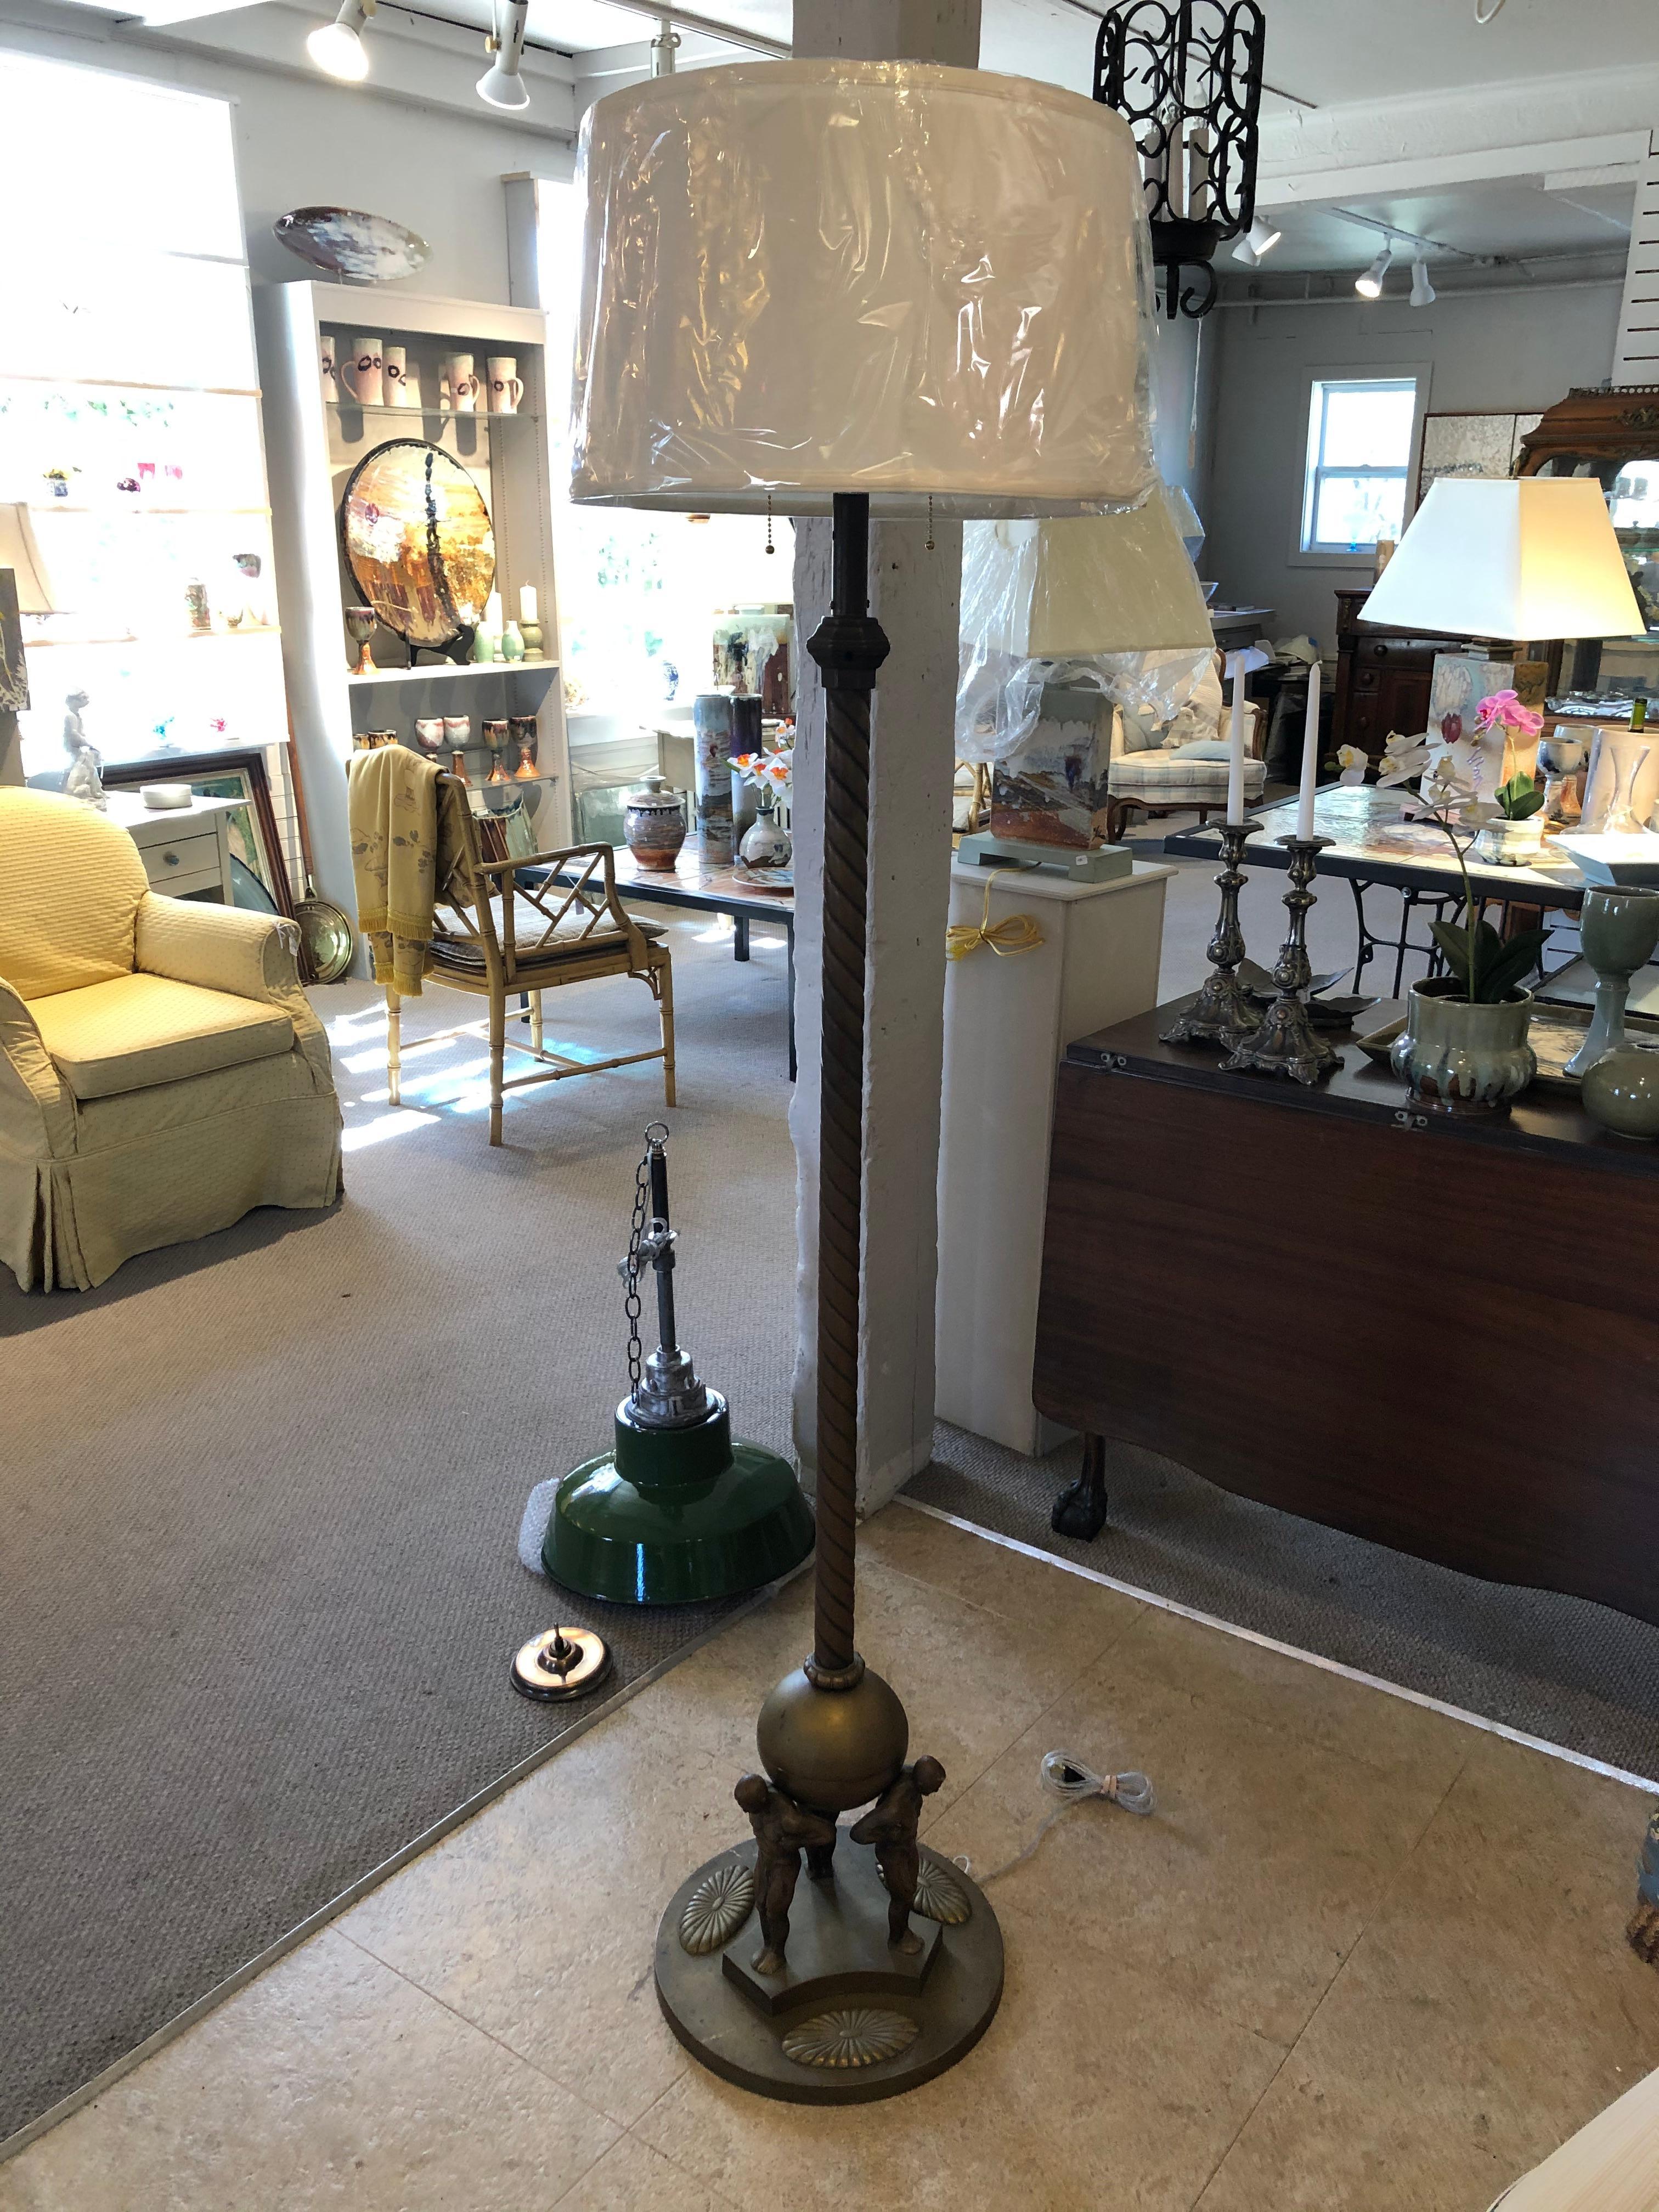 Beautiful and rare Art Nouveau Jugendstil floor lamp with 3 cast bronze Atlas style male nude sculptures around the base. This impressive and highly decorative floor lamp dates from 1910-1920. 
Measure: Diameter of base 14.5.